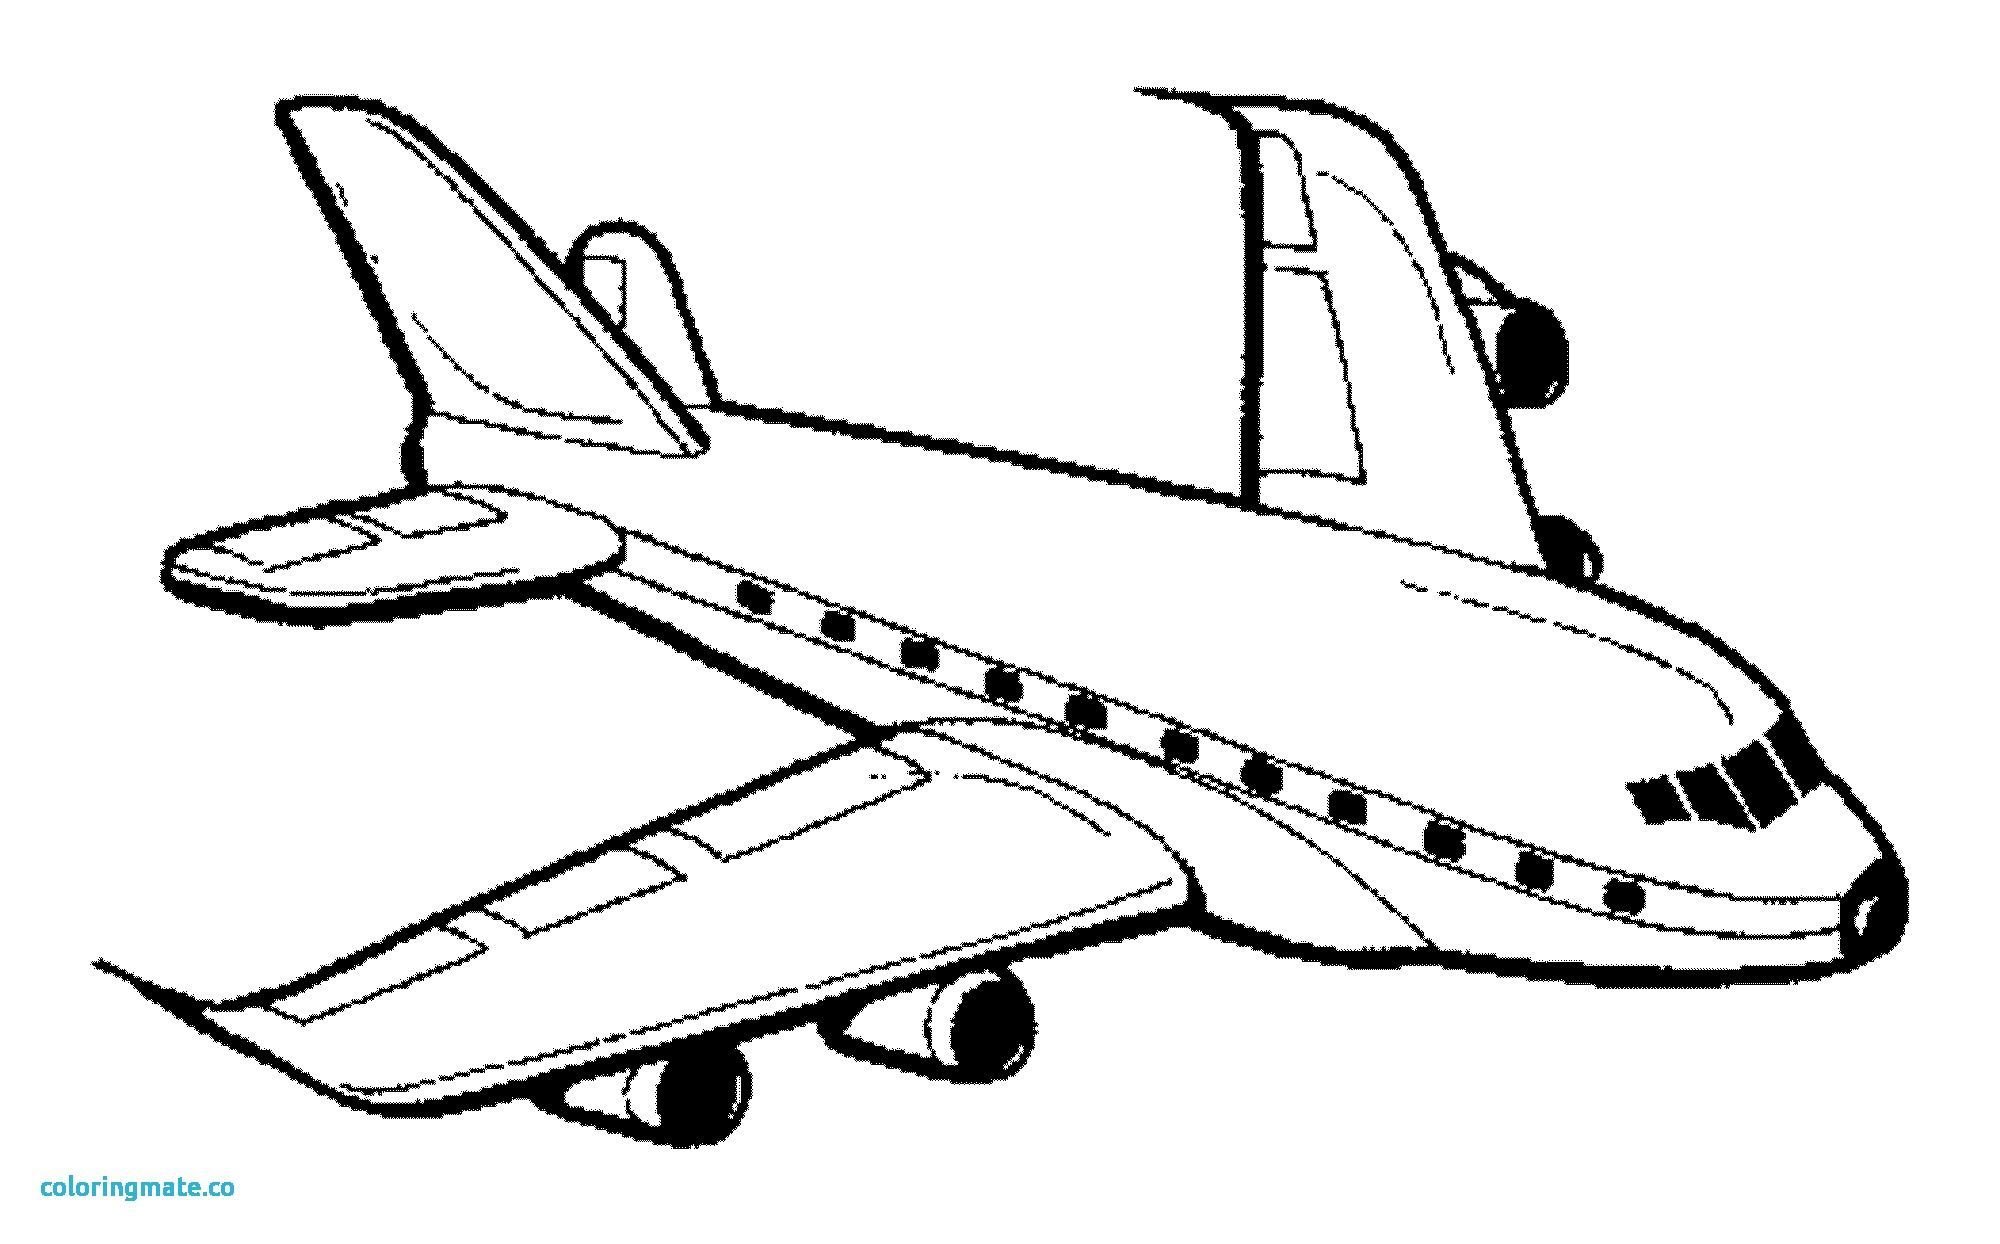 Ww2 Plane Coloring Pages at GetDrawings.com | Free for personal use Ww2